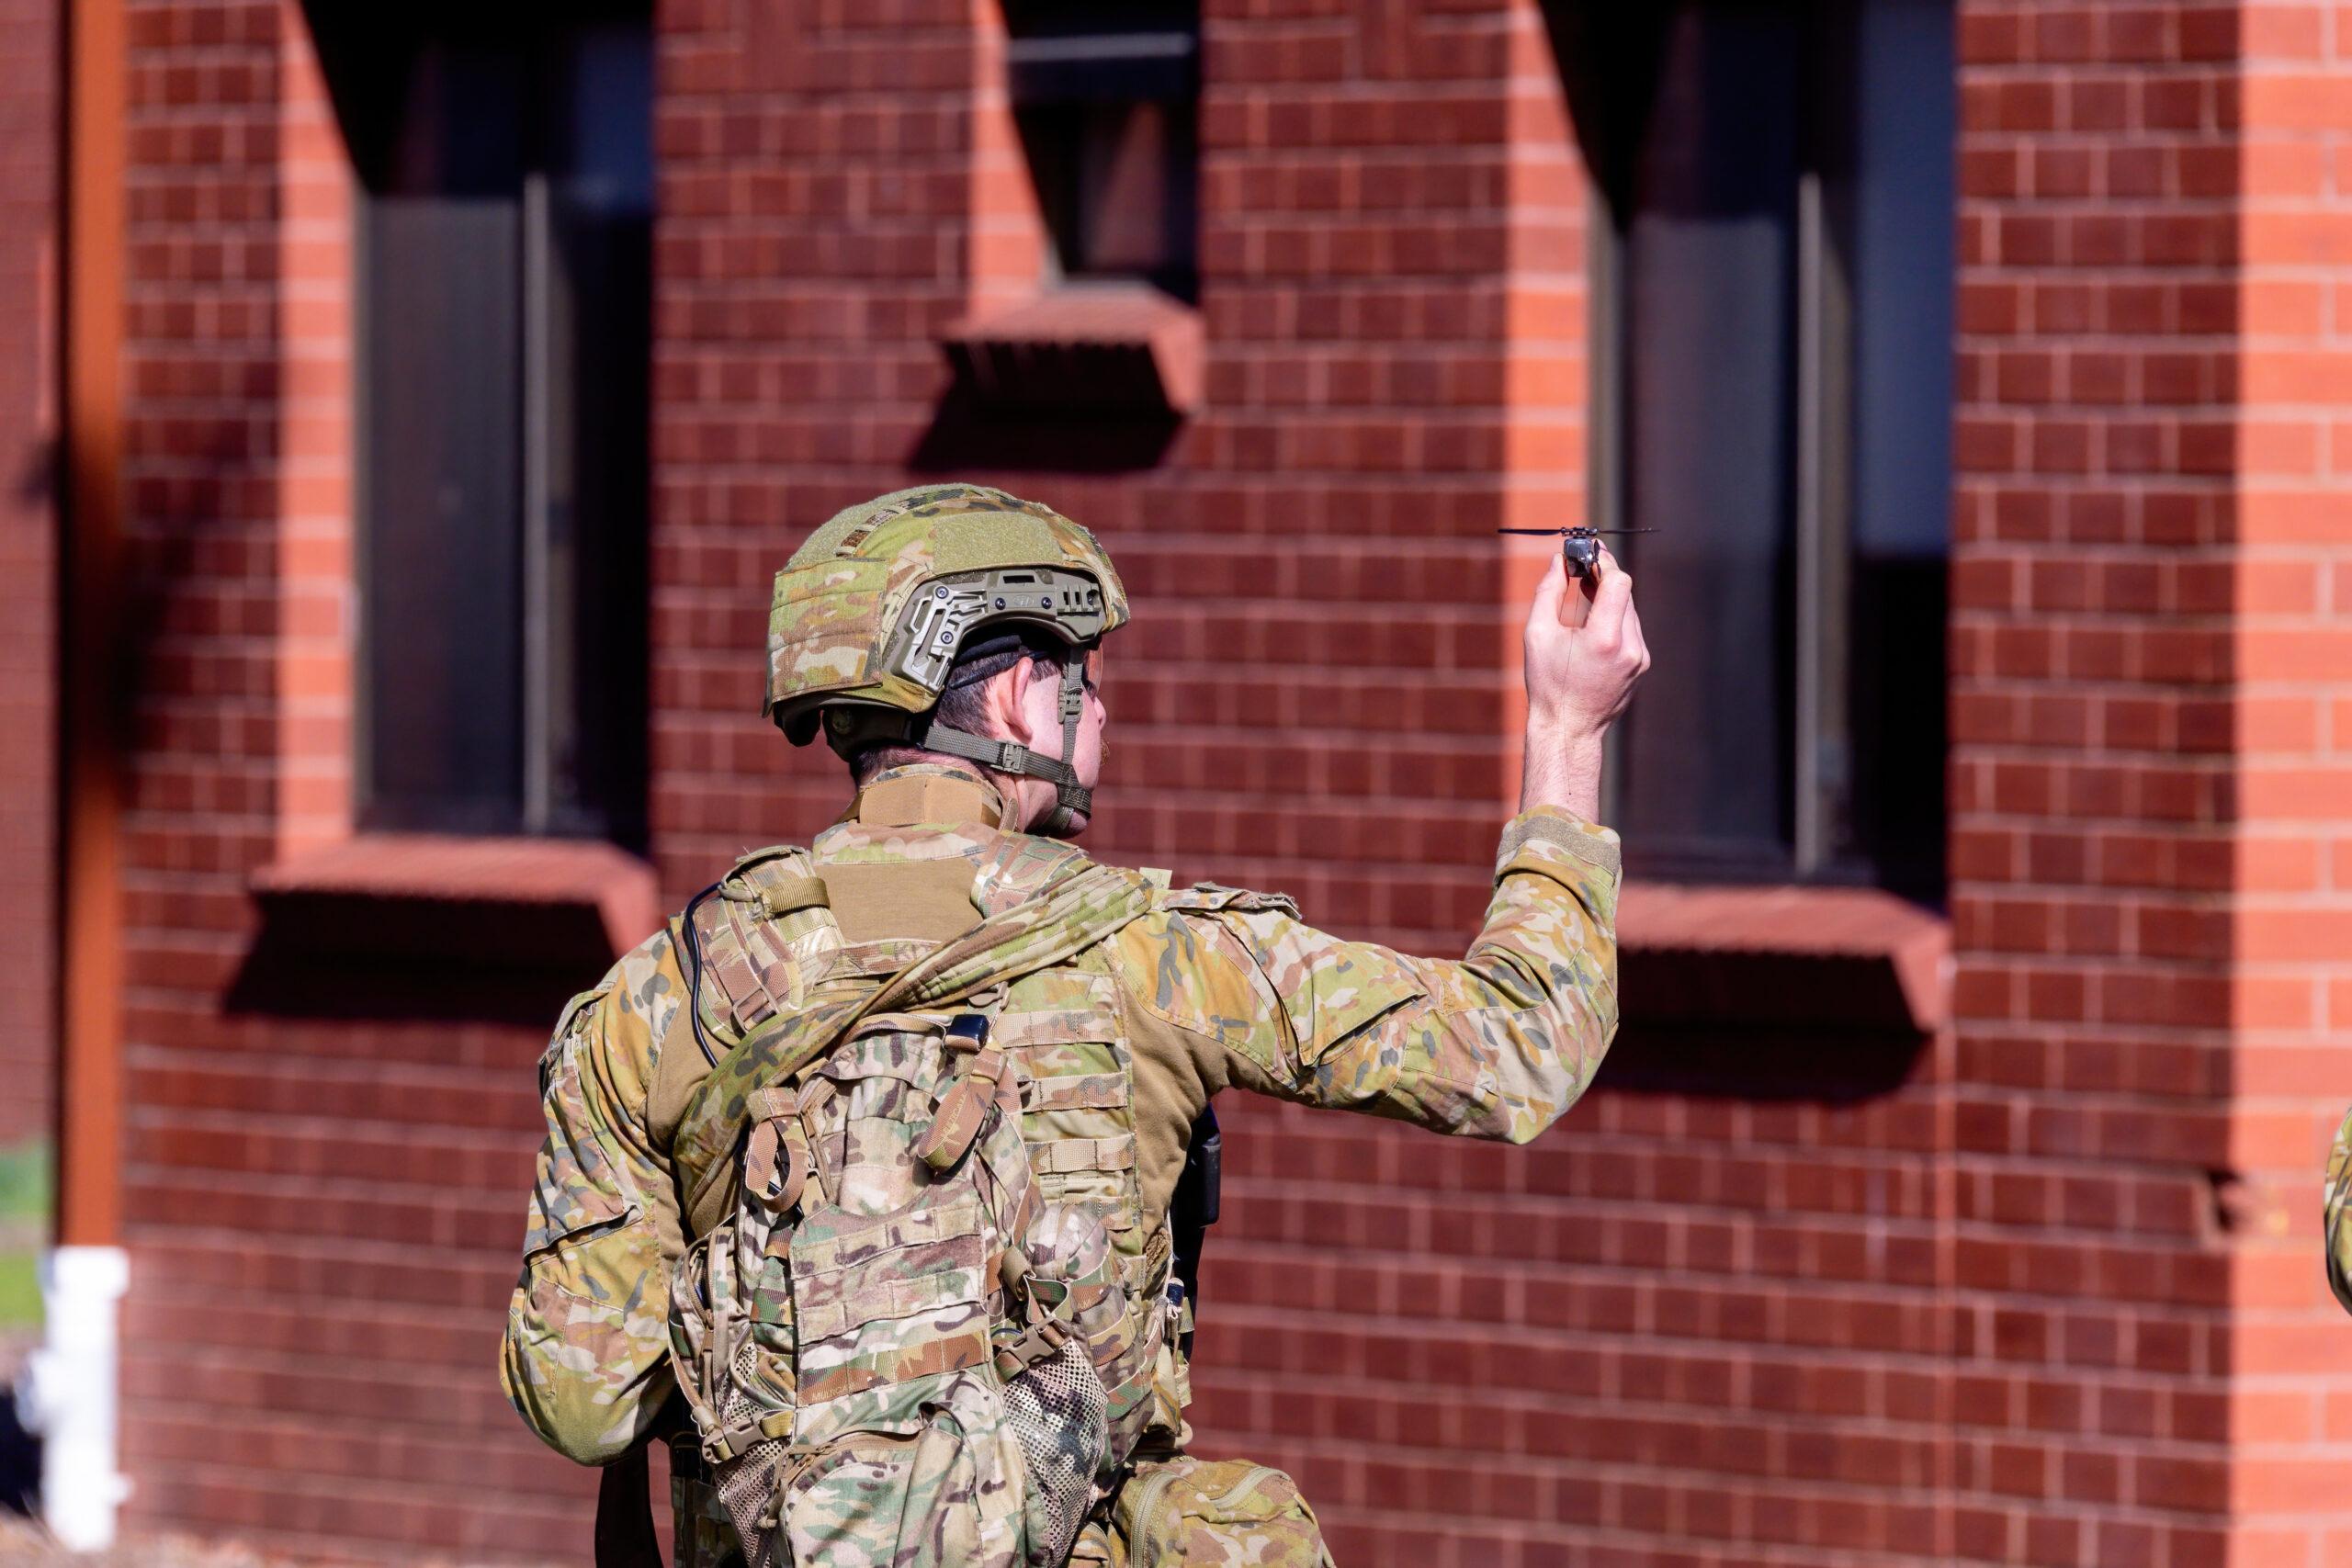 An Australian Army 4th Brigade soldier launches a Black Hornet Nano Unmanned Aerial System during urban operations training at the RAAF Williams, Point Cook on 26 May, as a part of Exercise Abel Diemen 2023. *** Local Caption *** The 4th Brigade is conducting Exercise ABEL DIEMEN across locations in Victoria and Tasmania from 19 to 28 May 2023. The 10-day training exercise provides soldiers with the opportunity to practice the types of tasks applicable in domestic and regional security operations following an ADF Call-Out under provisions for Defence Force Aid to the Civil Authority (DFACA), as well as carry out training to improve and maintain Foundation Warfighting skills.